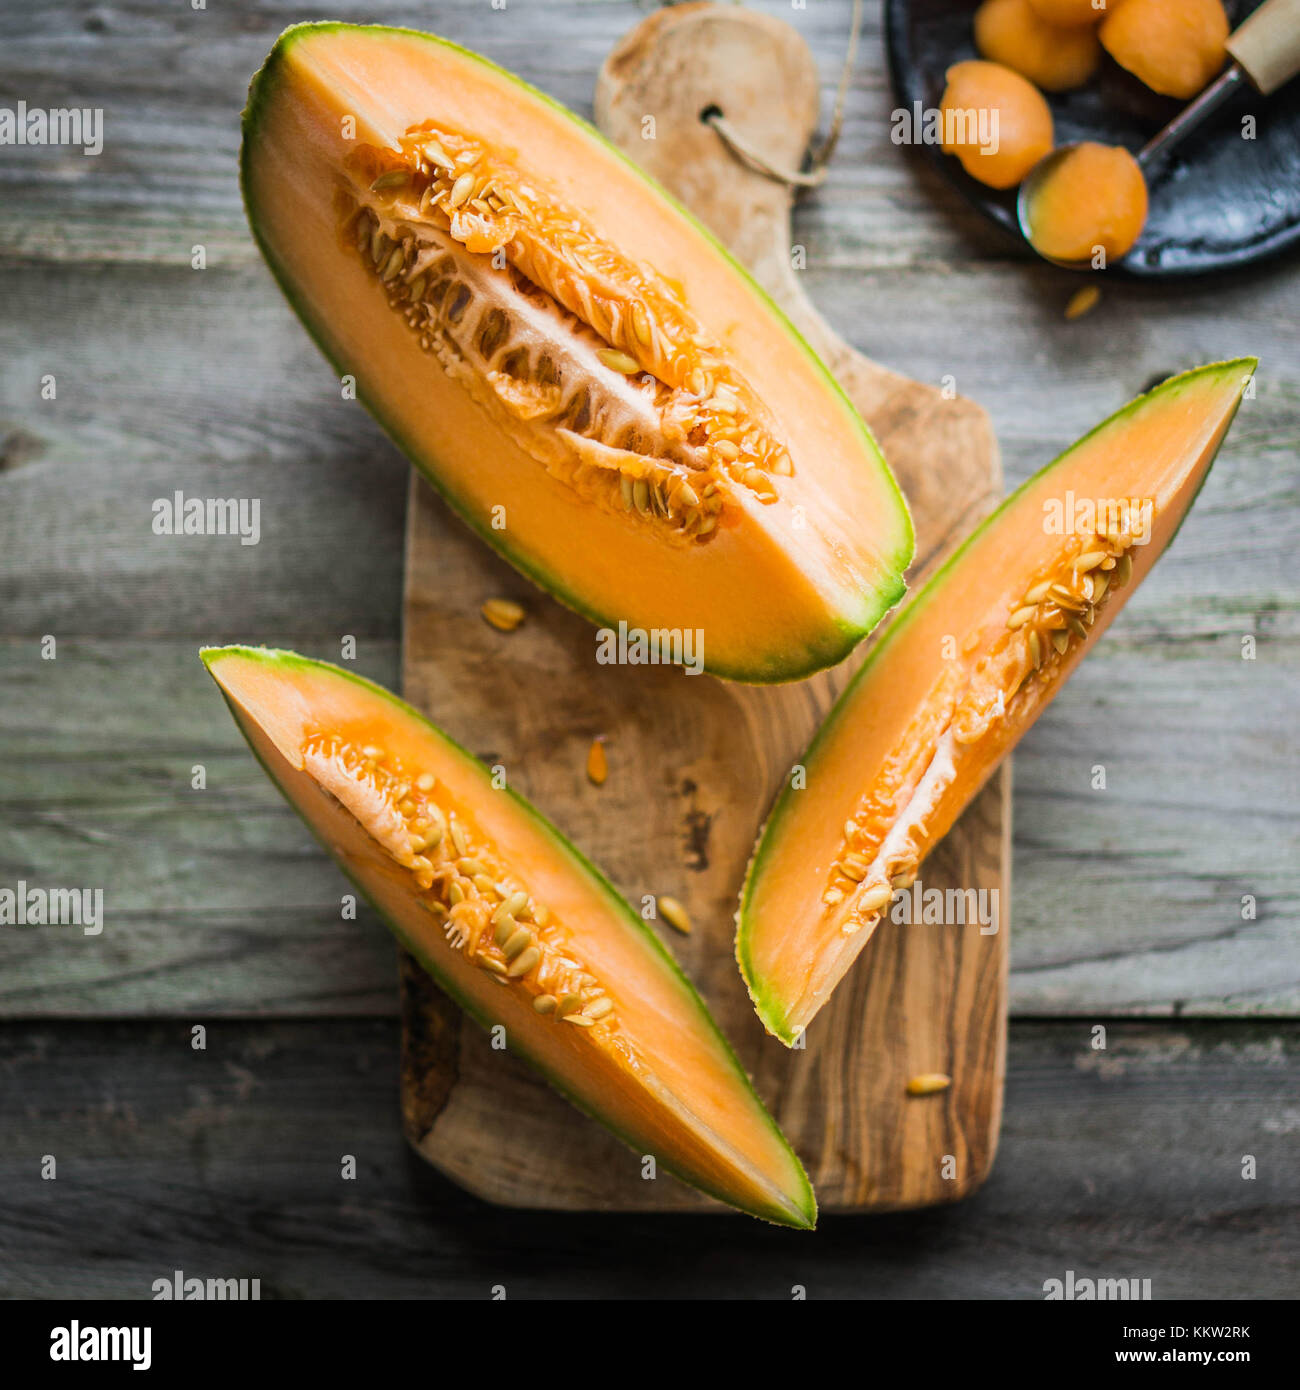 Sliced Melon On Wooden Background Stock Photo